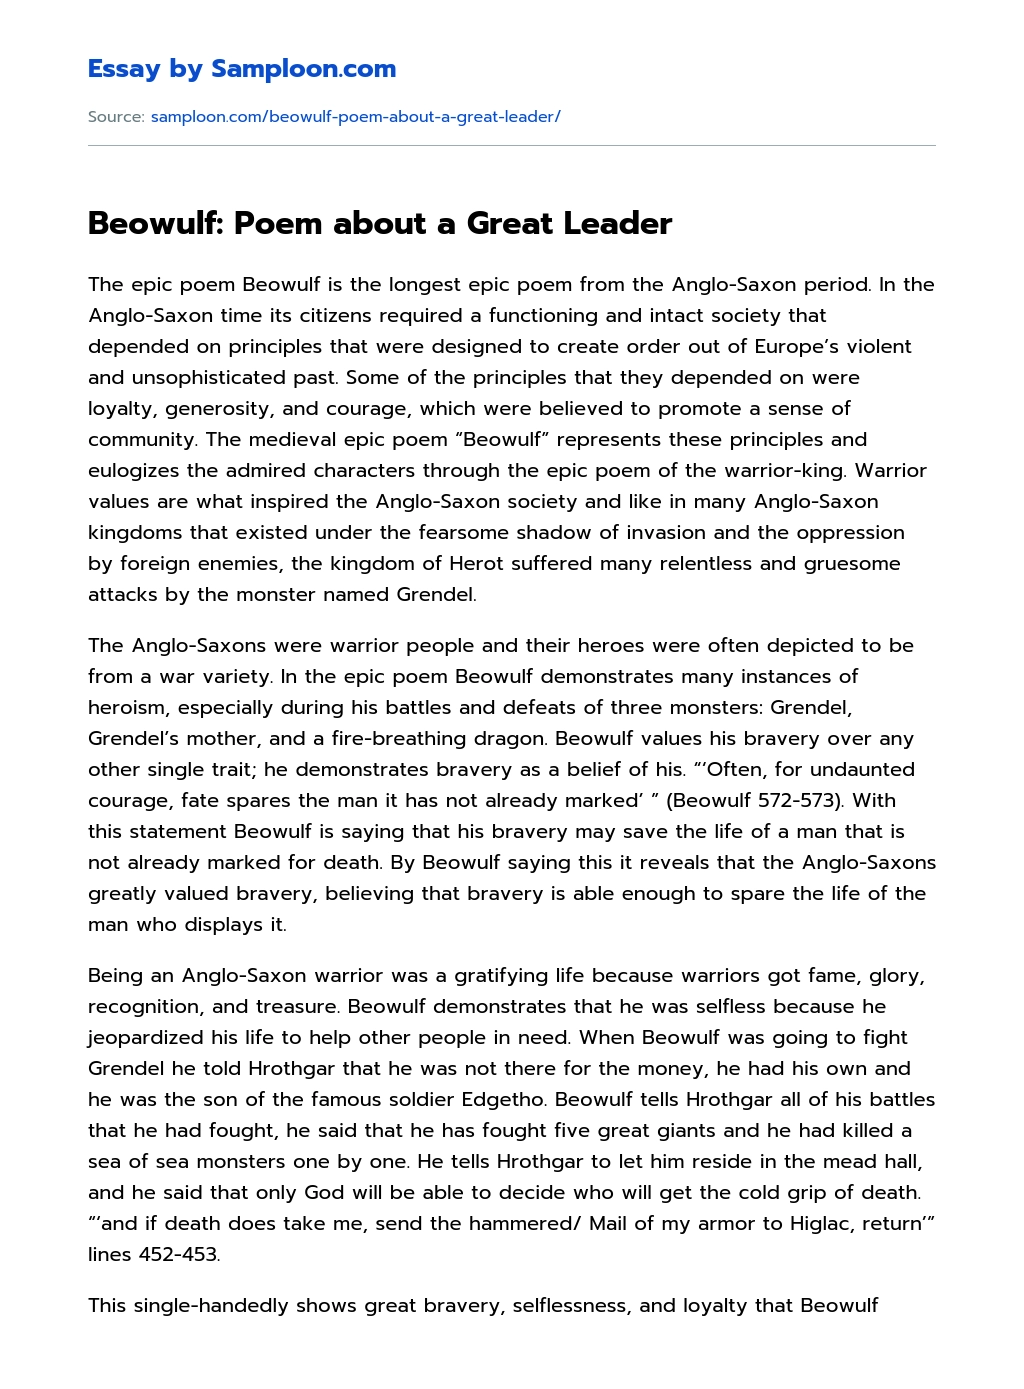 Beowulf: Poem about a Great Leader Summary essay